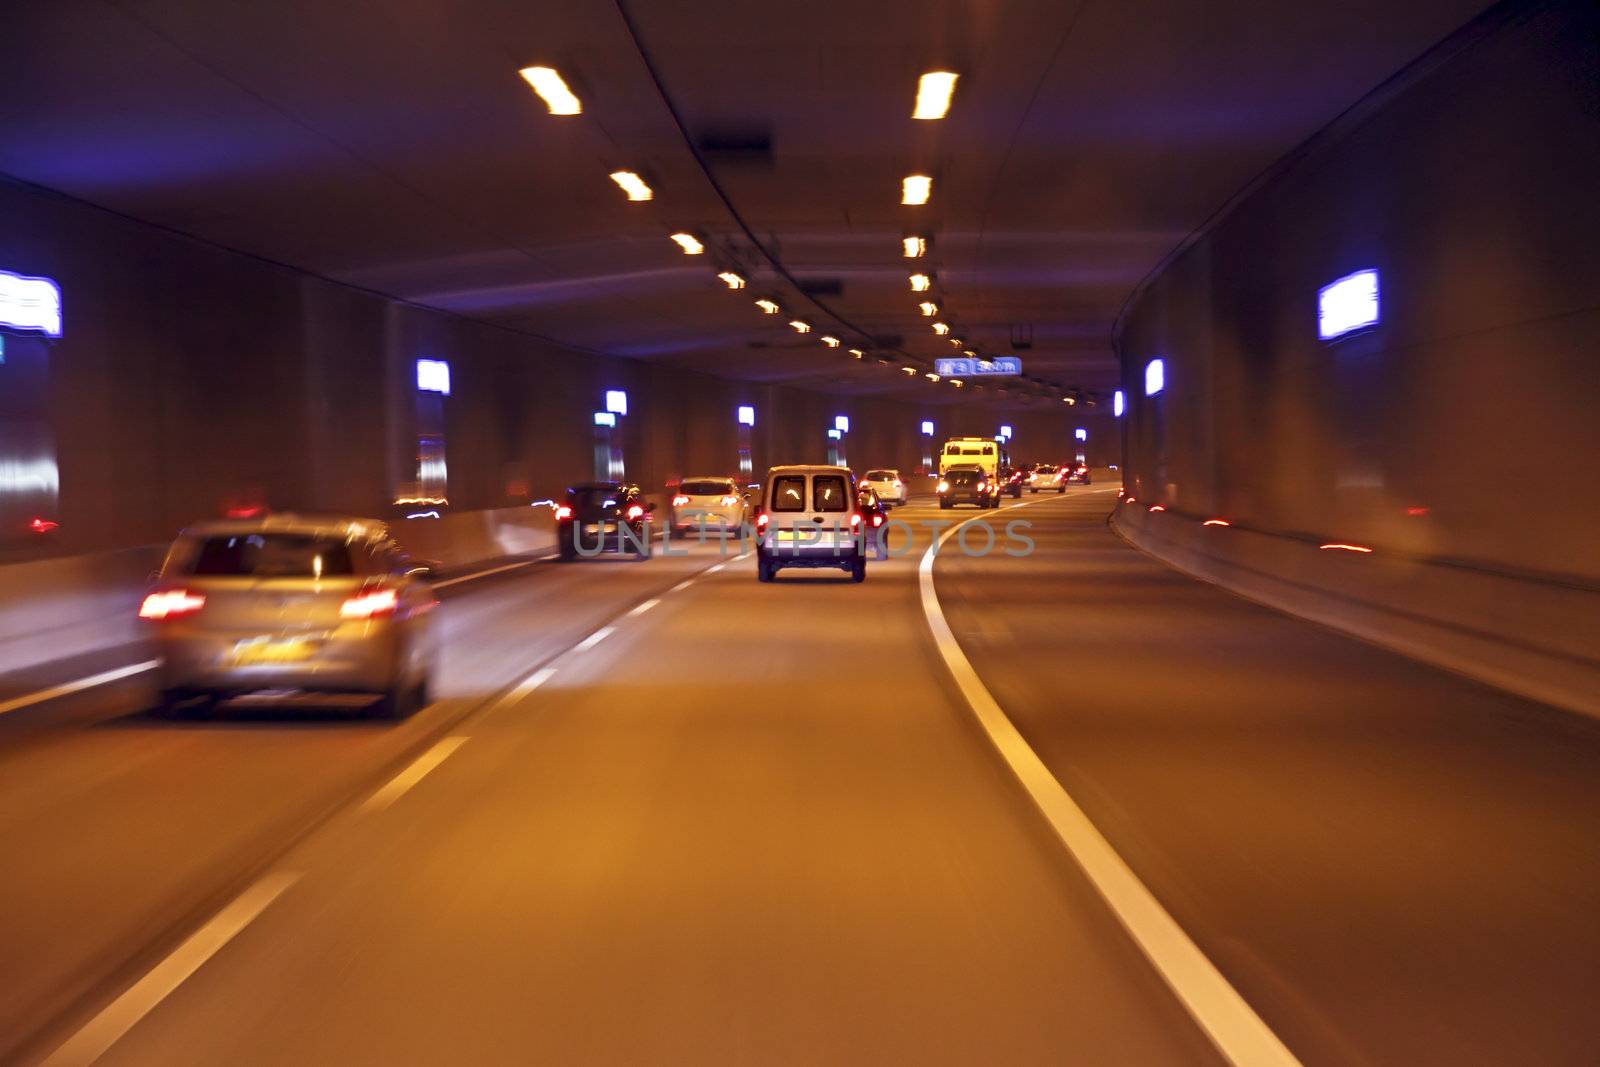 Driving through a tunnel in the Netherlands by devy